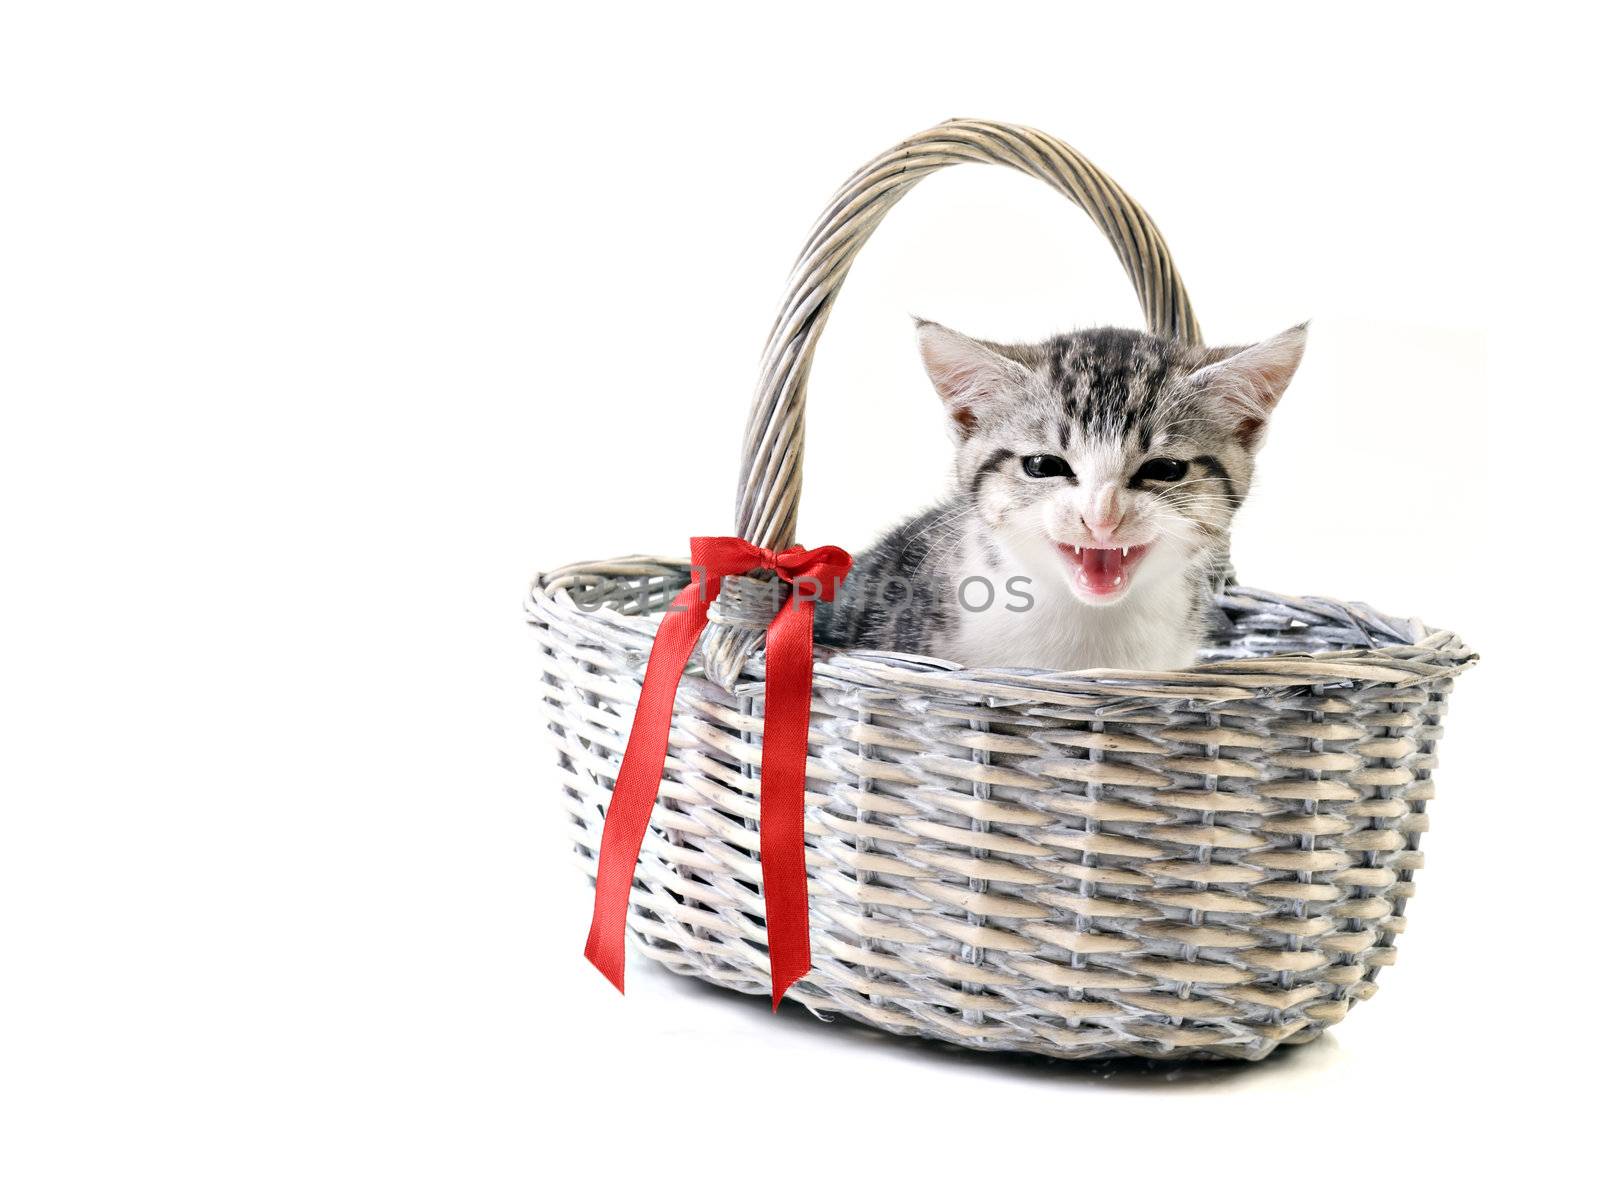 Adorable little kitten on white background with space for text by tish1